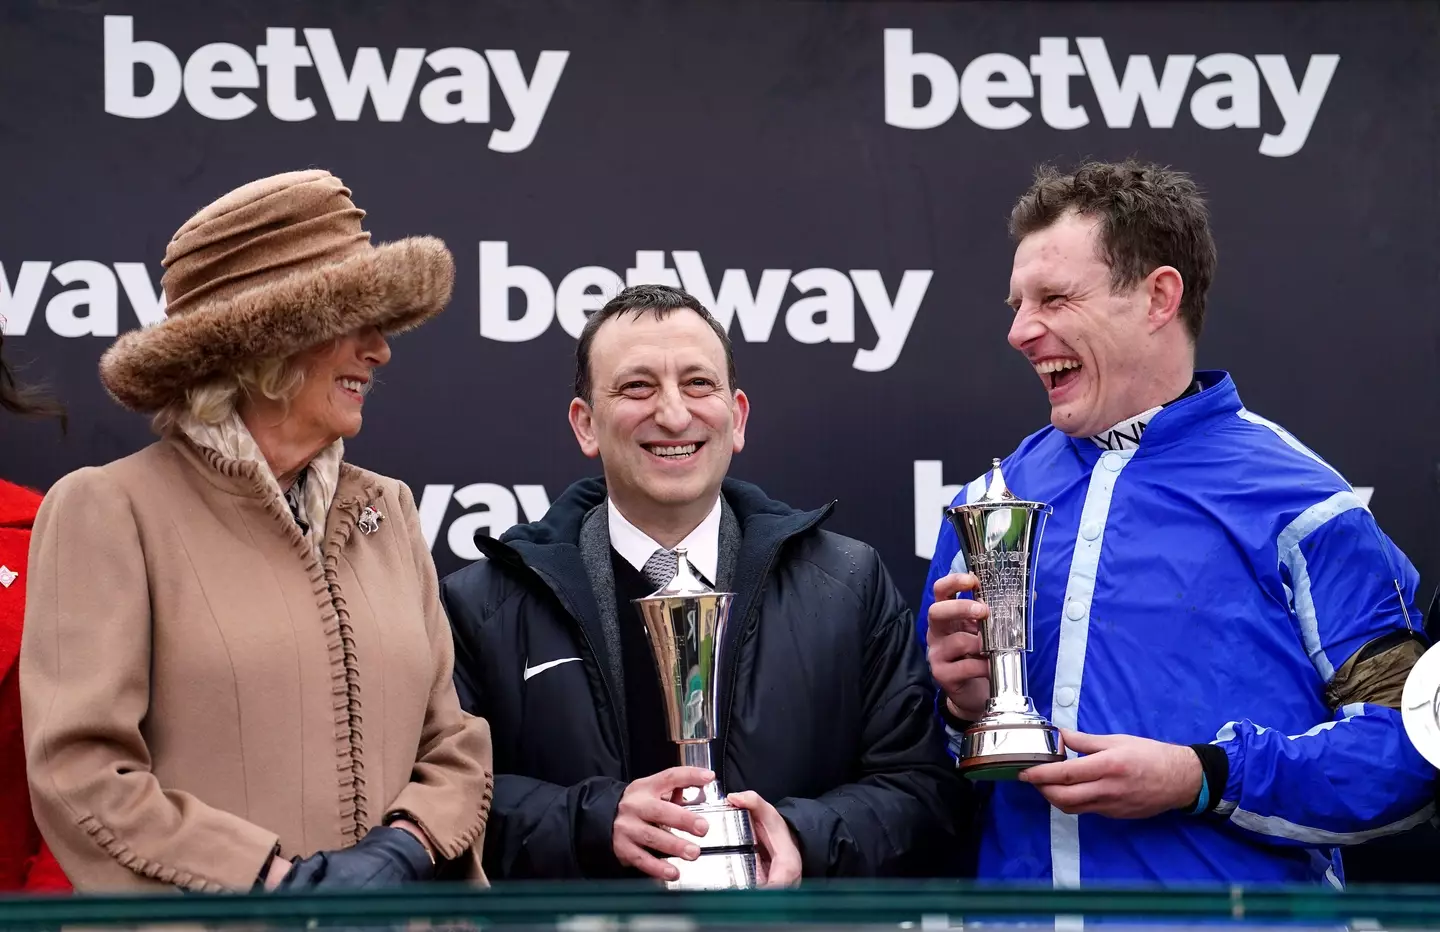 Jockey Paul Townend and owner Tony Bloom alongside the Queen Consort following victory in the Betway Queen Mother Champion Chase with Energumene.